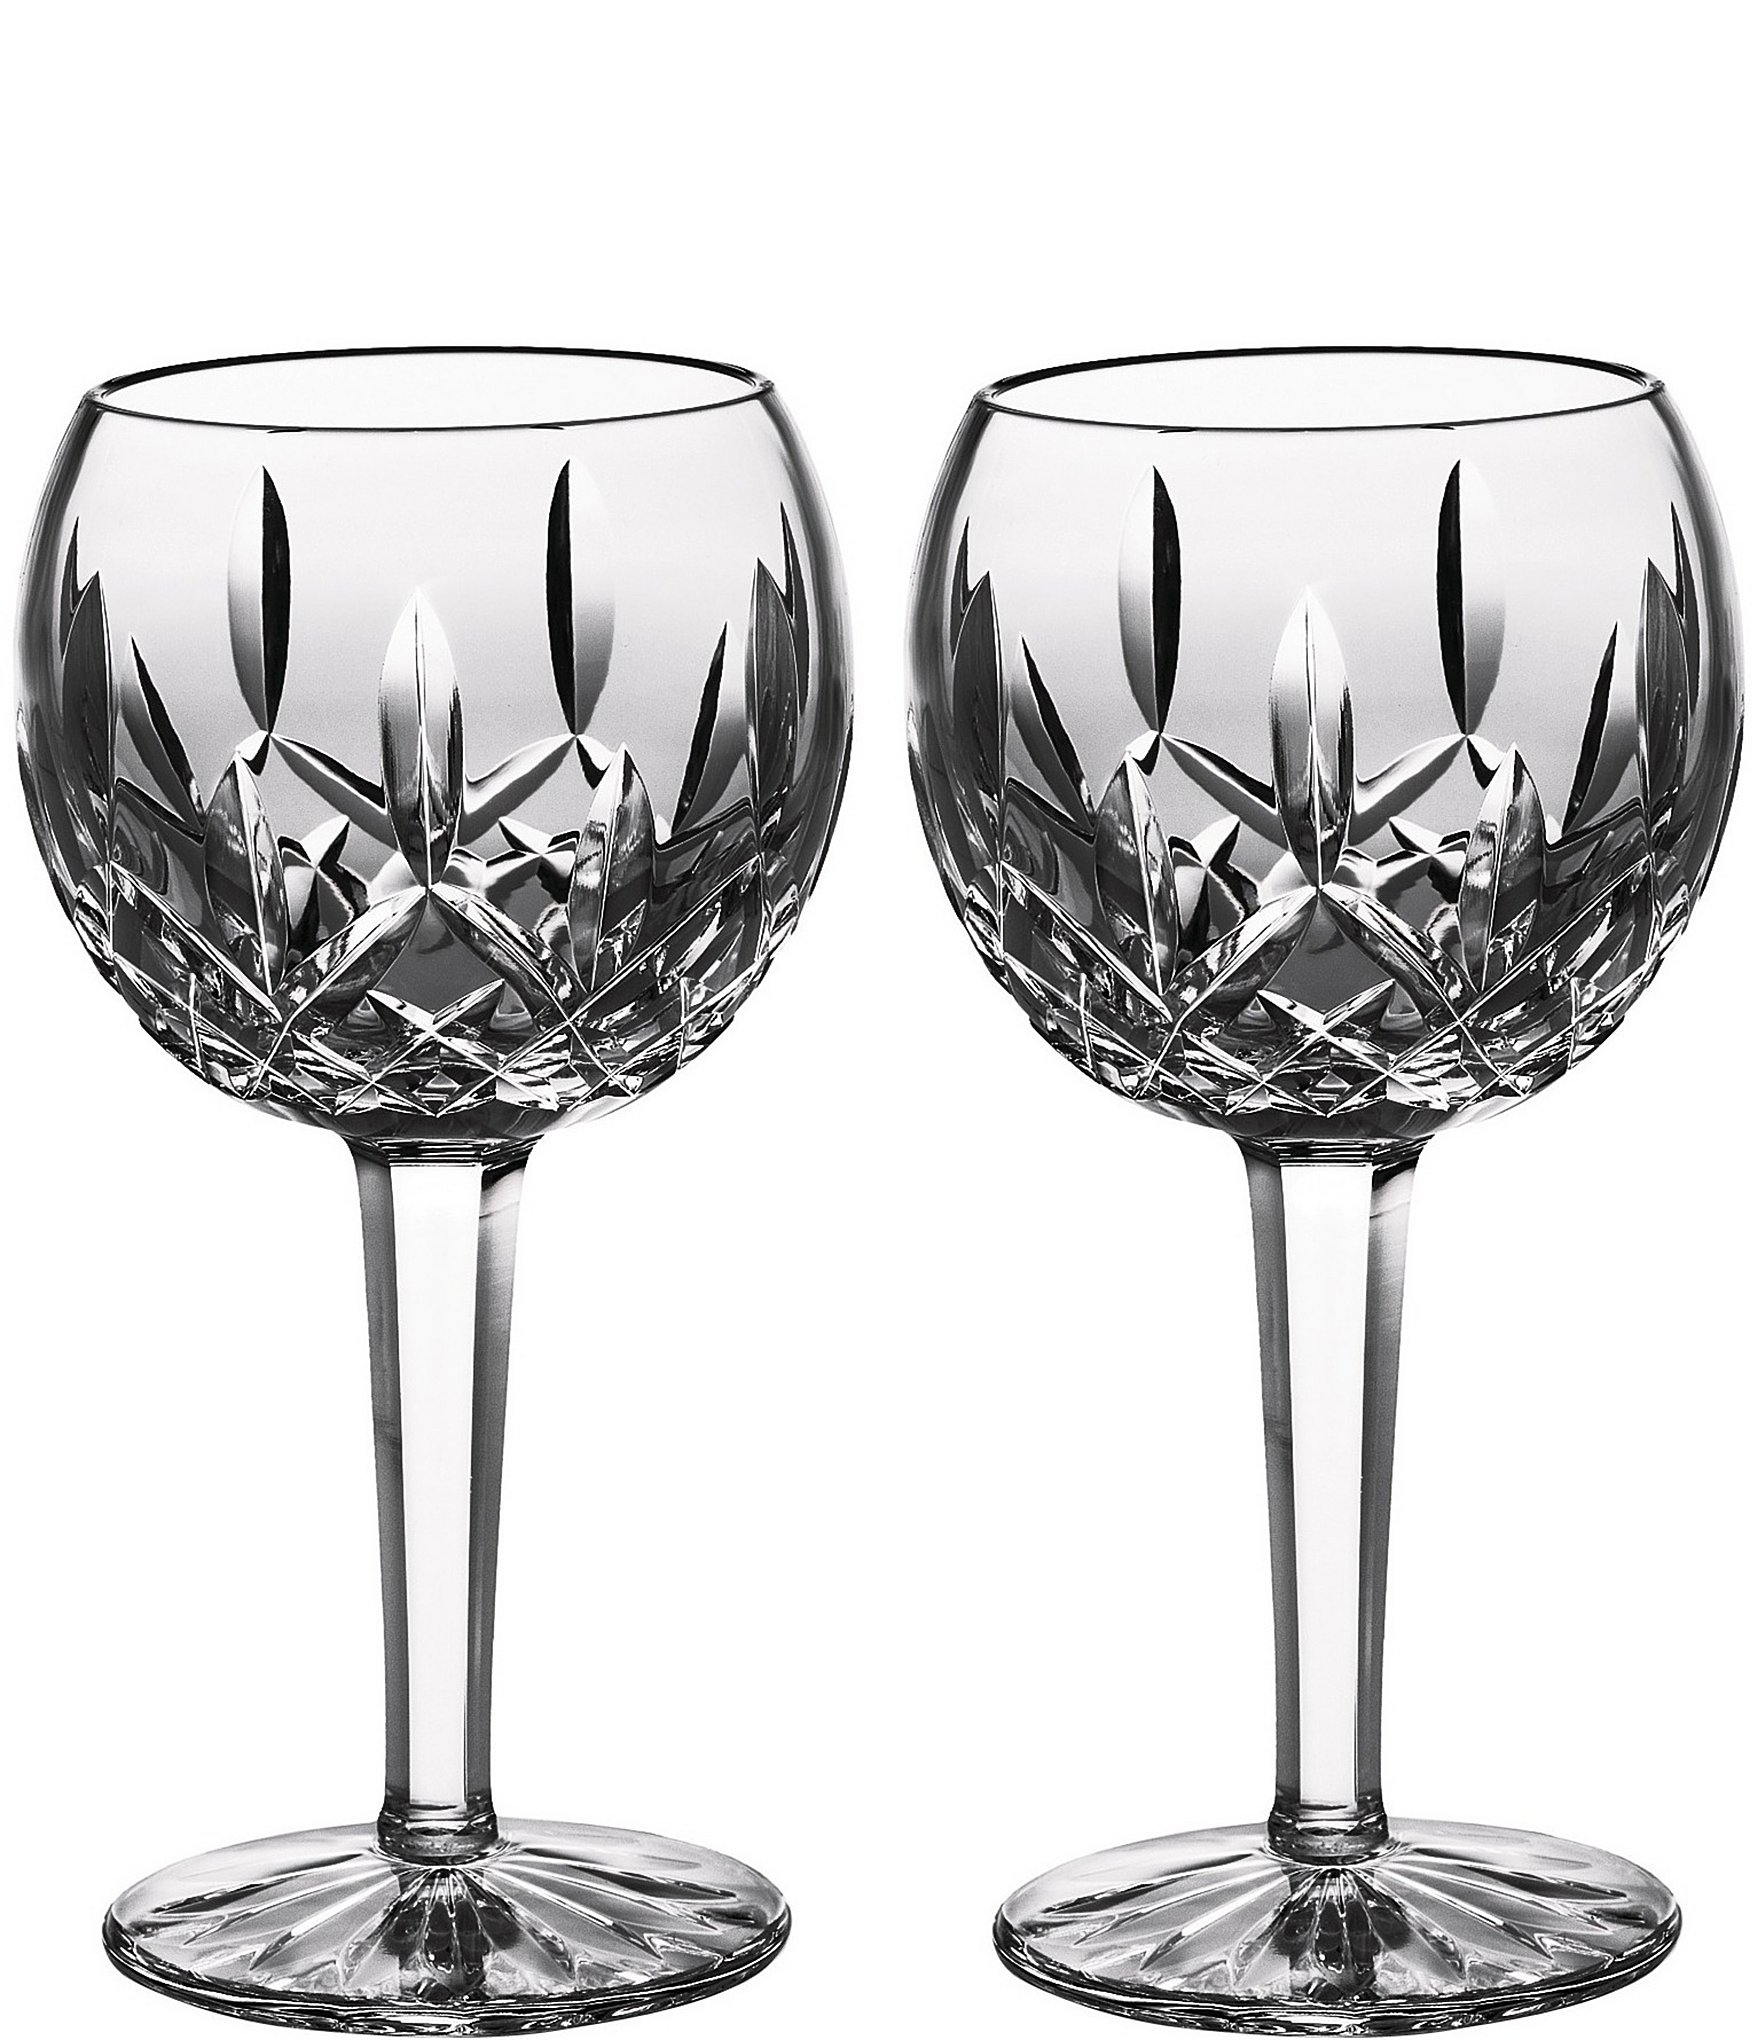 https://dimg.dillards.com/is/image/DillardsZoom/zoom/waterford-lismore-60th-anniversary-collection-classic-lismore-balloon-wine-glass-pair/00000000_zi_aa132690-d943-4ed4-a31b-1778cadff820.jpg